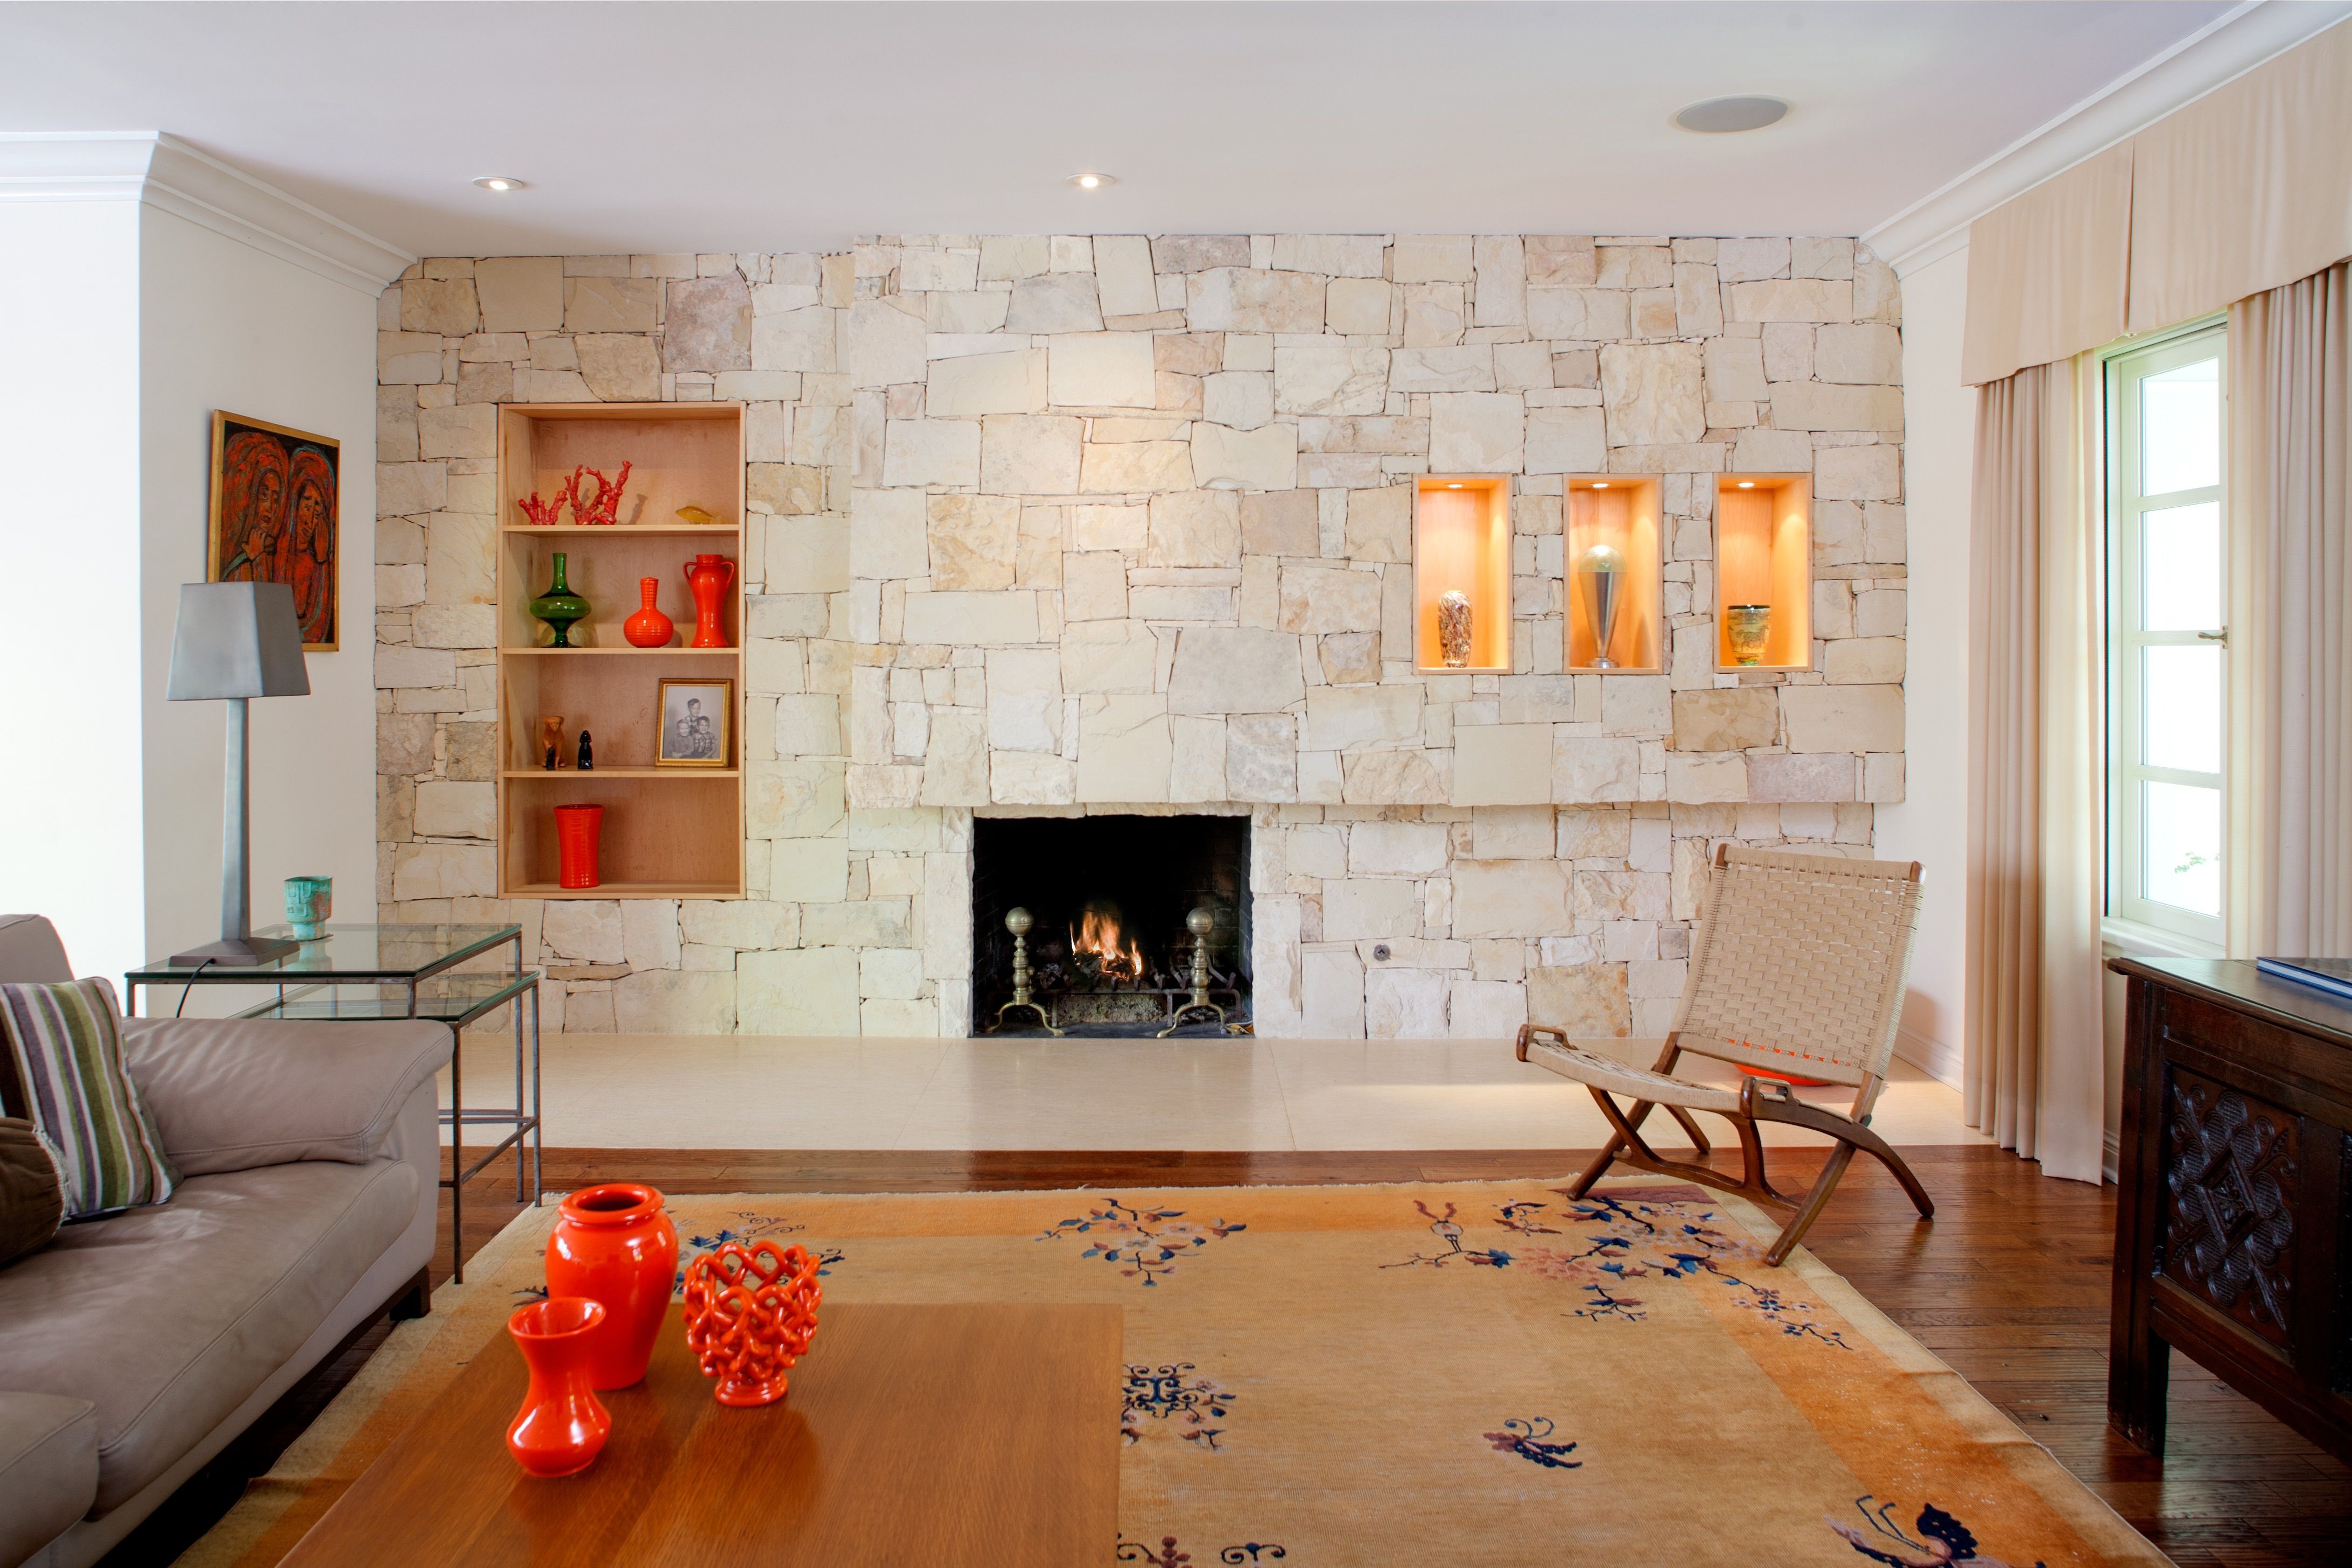 Living Room Wall Decor Features Dry Stacked Stone Facade With Built In Shelves And Lighting (View 15 of 30)